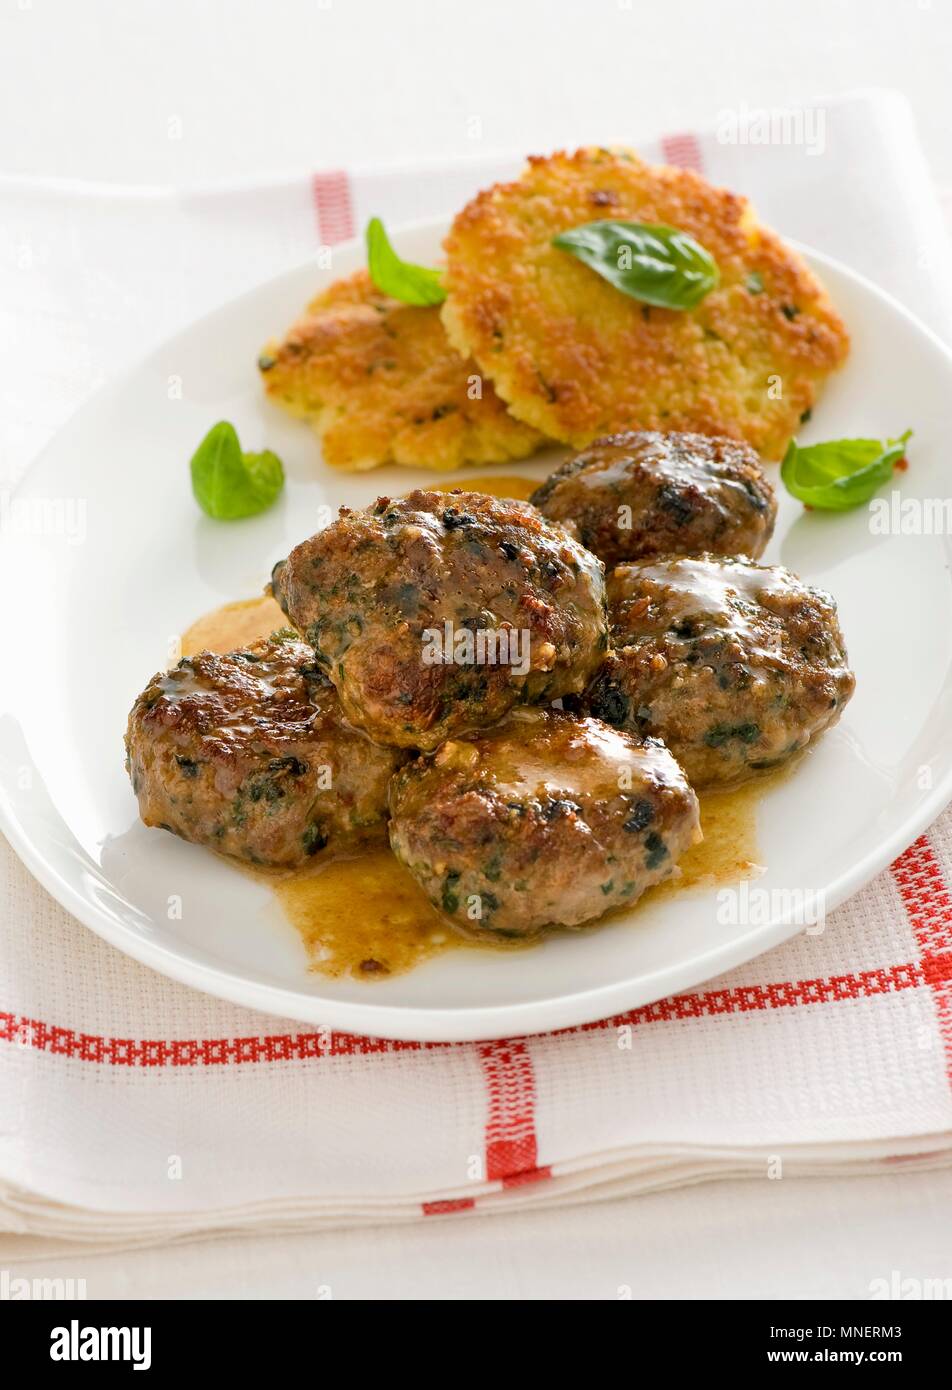 Polpettine speziate e frittelle di pane (spicy meatballs with bread fritters, Italy) Stock Photo